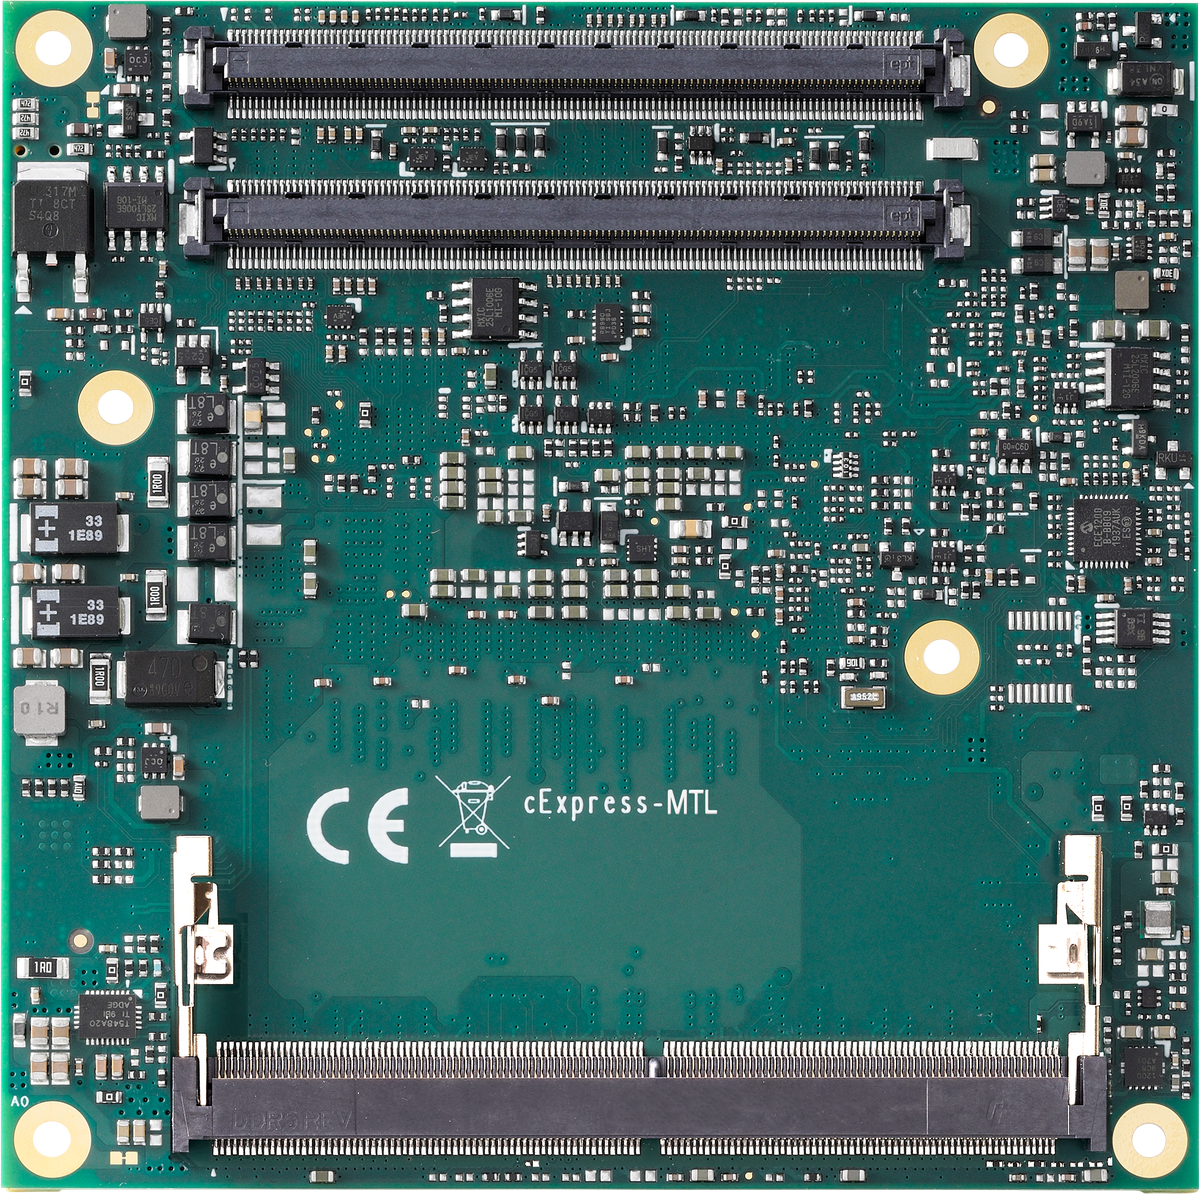 ADLINK releases Intel Core Ultra-powered COM Express Module with integrated CPU+GPU+NPU providing up to 50% in power saving